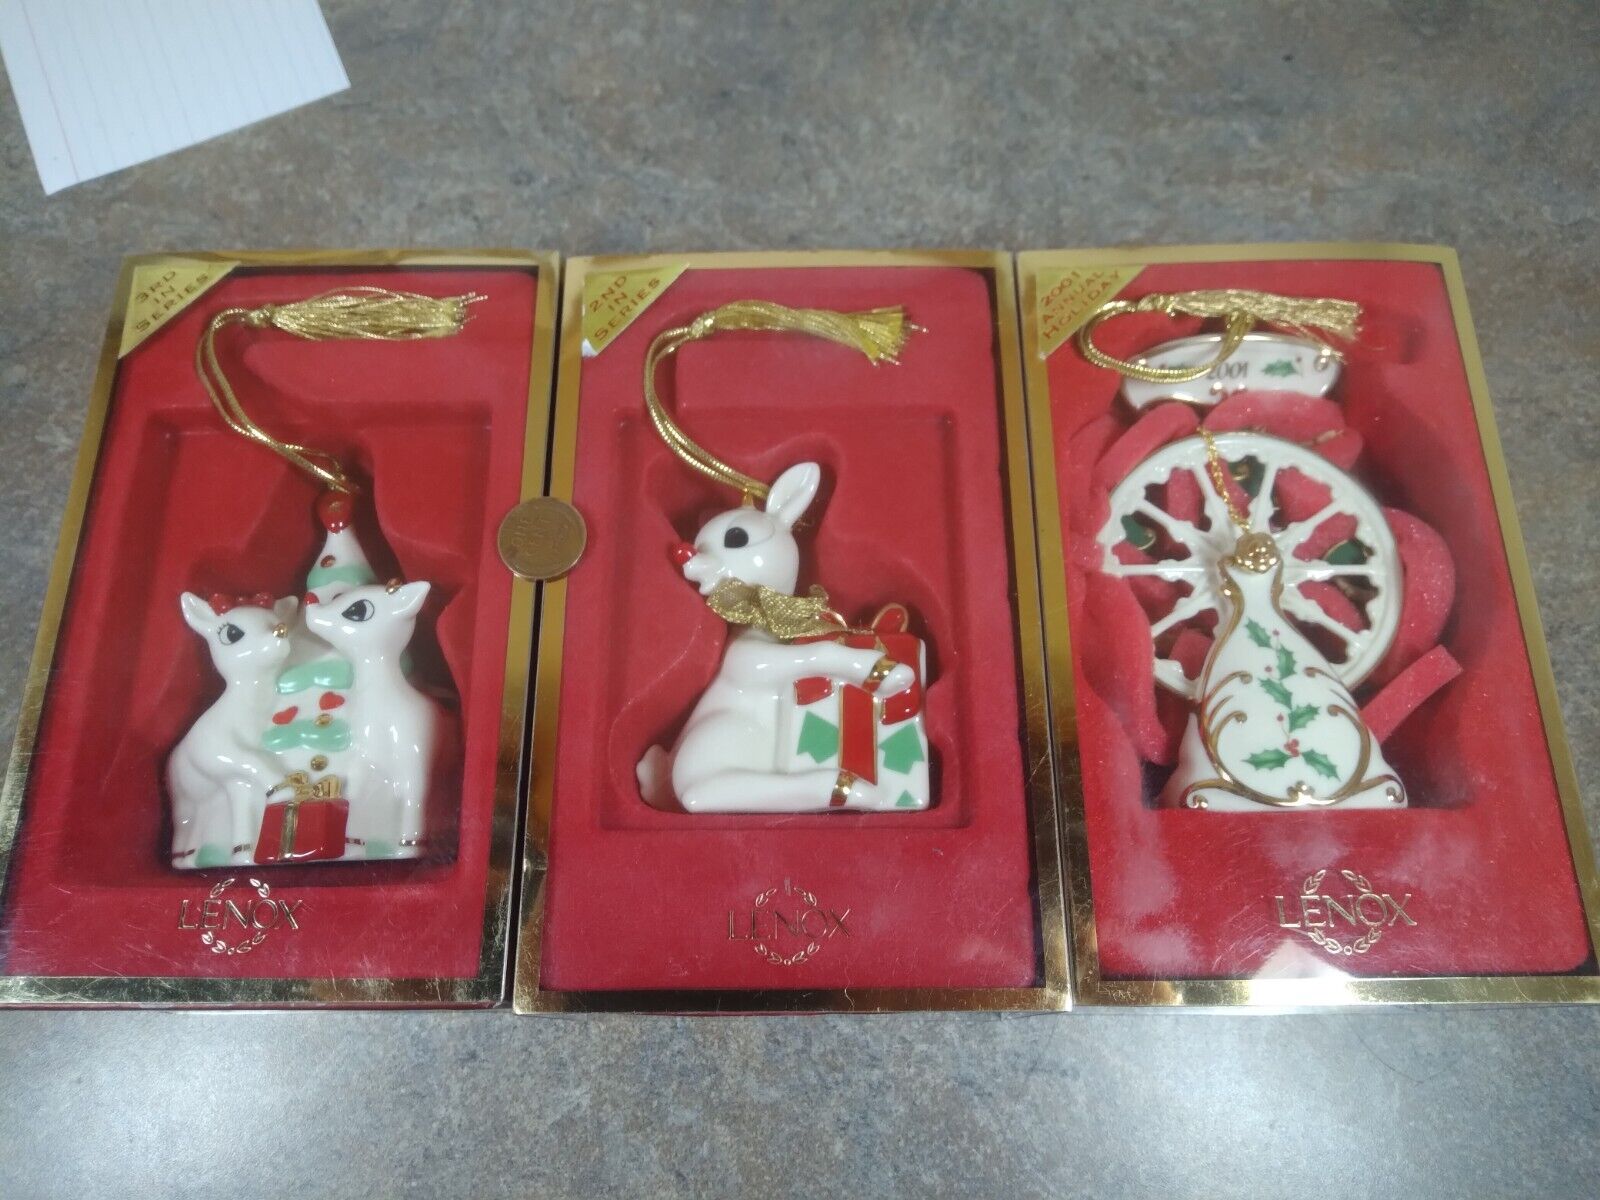 Set of 3 Lenox China Ornaments in Boxes Rudolph Ferris Wheel